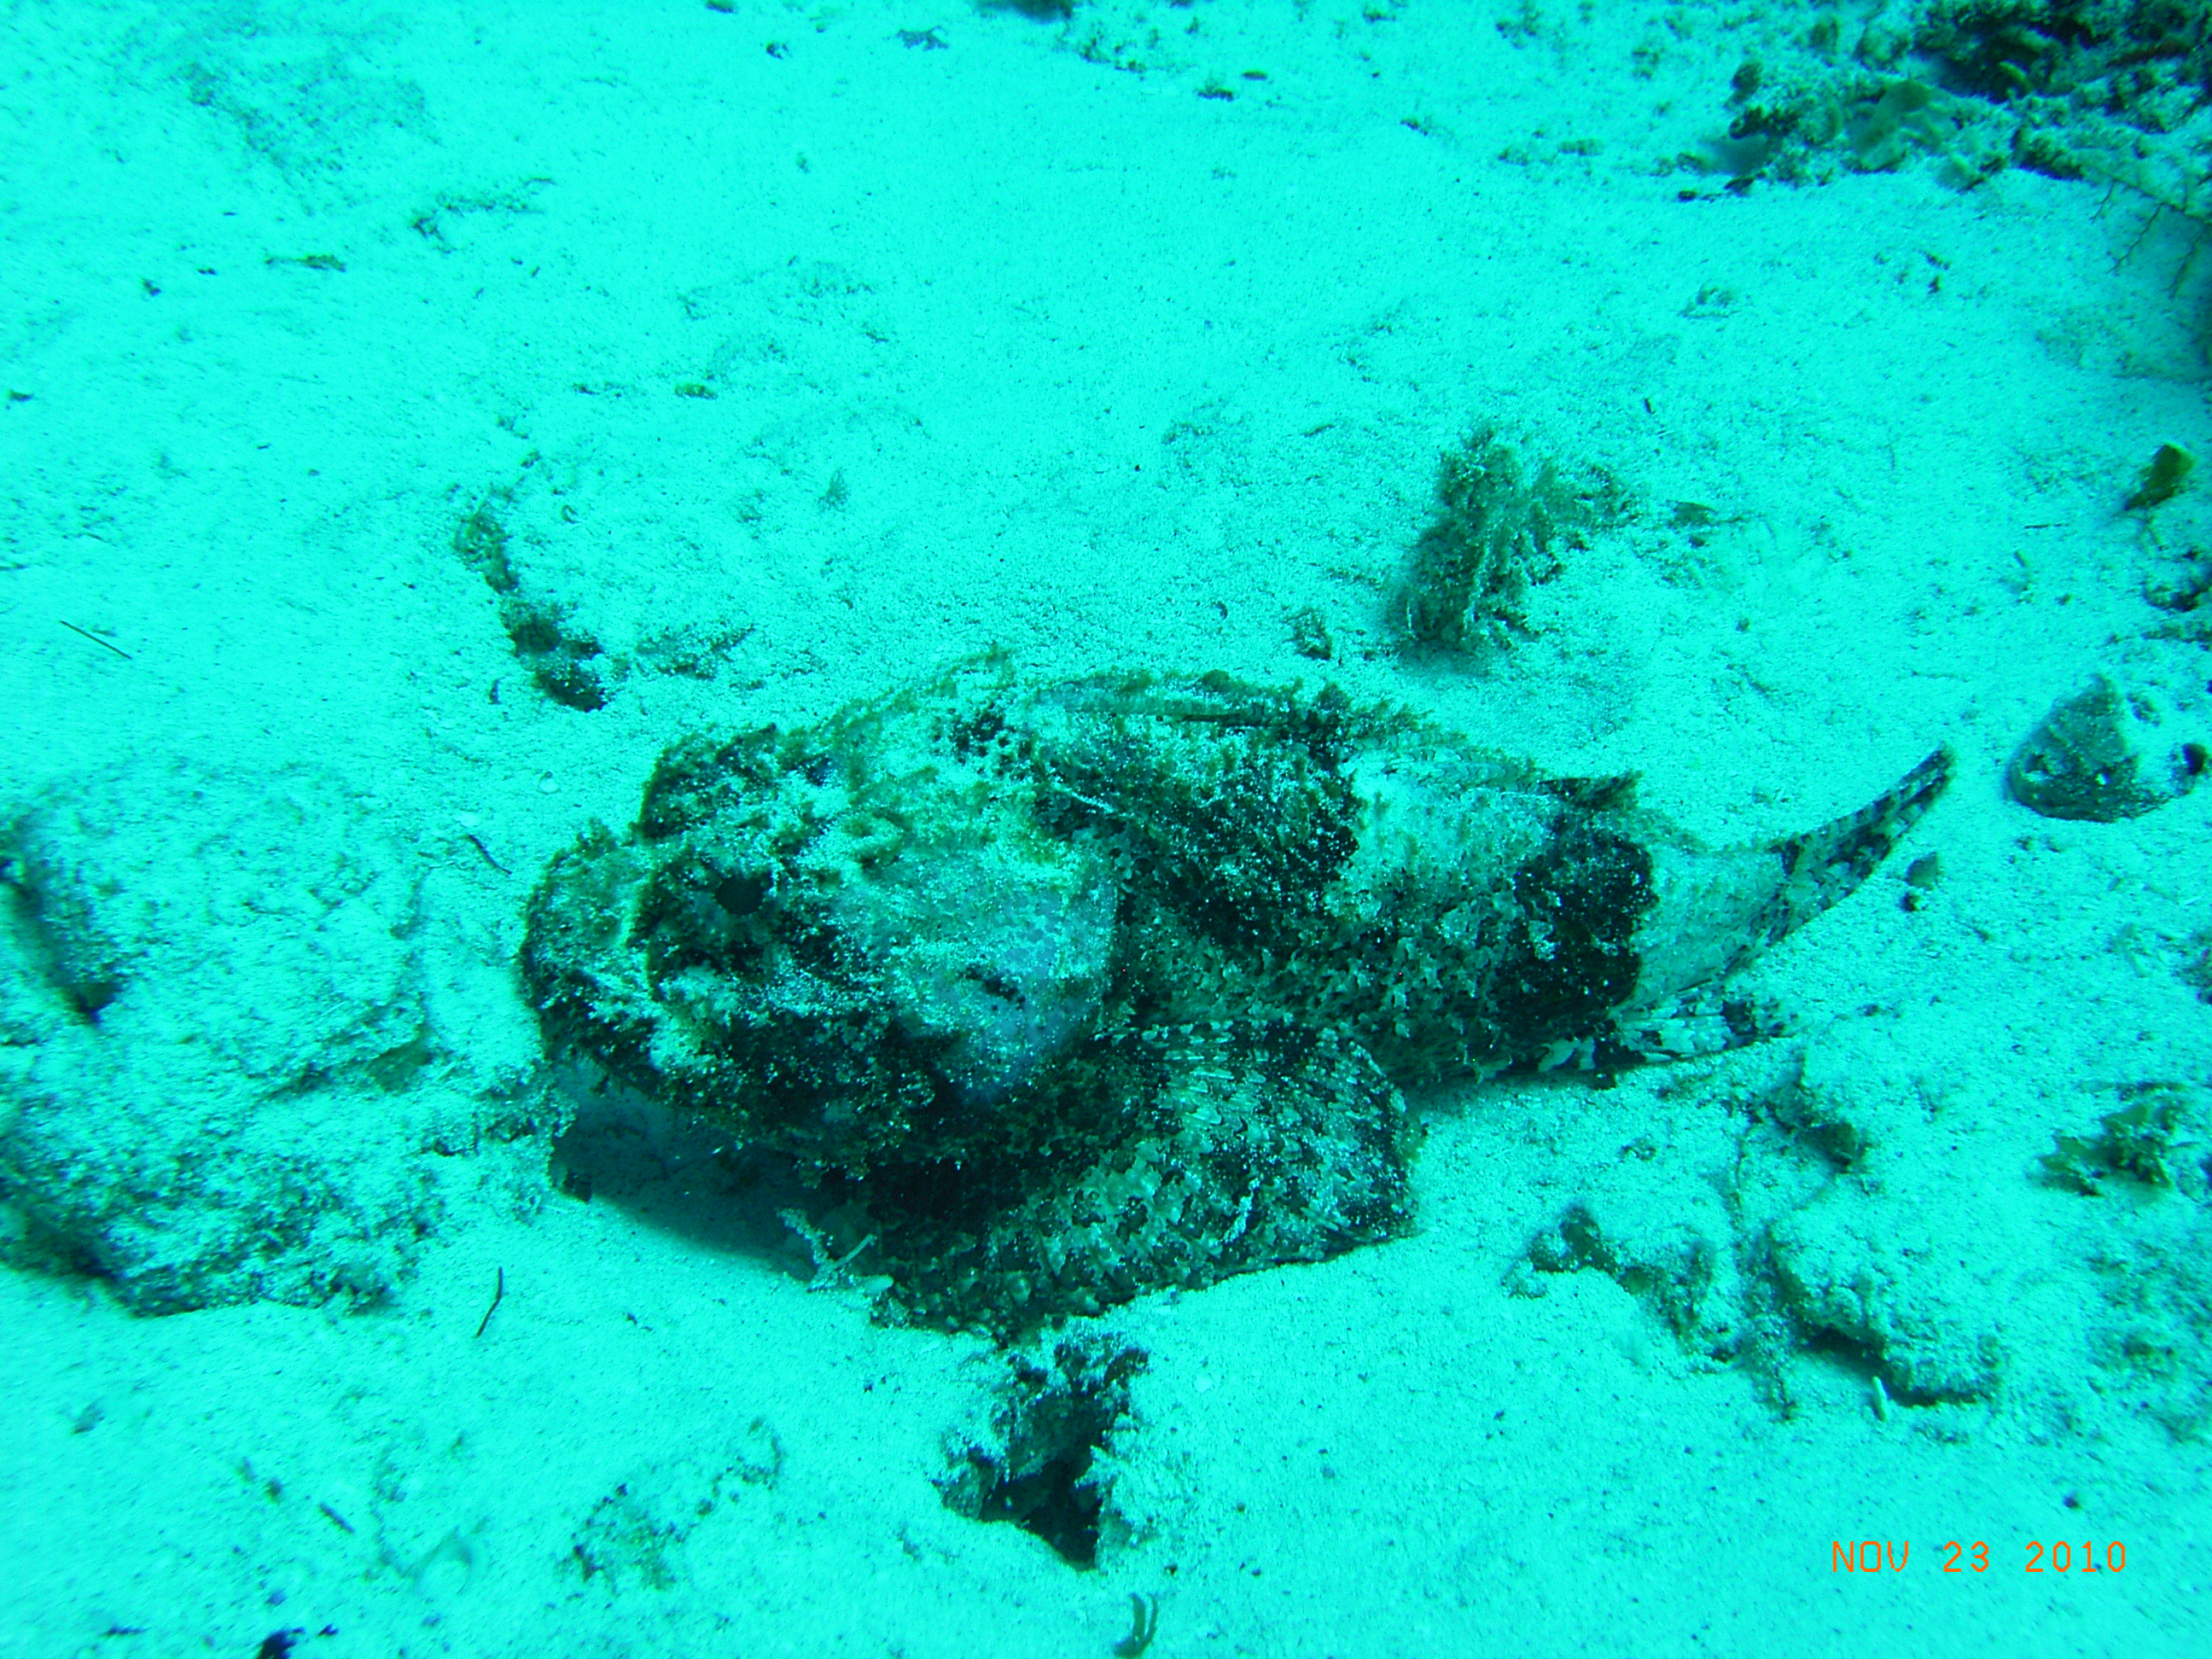 Spotted scorpionfish (?)